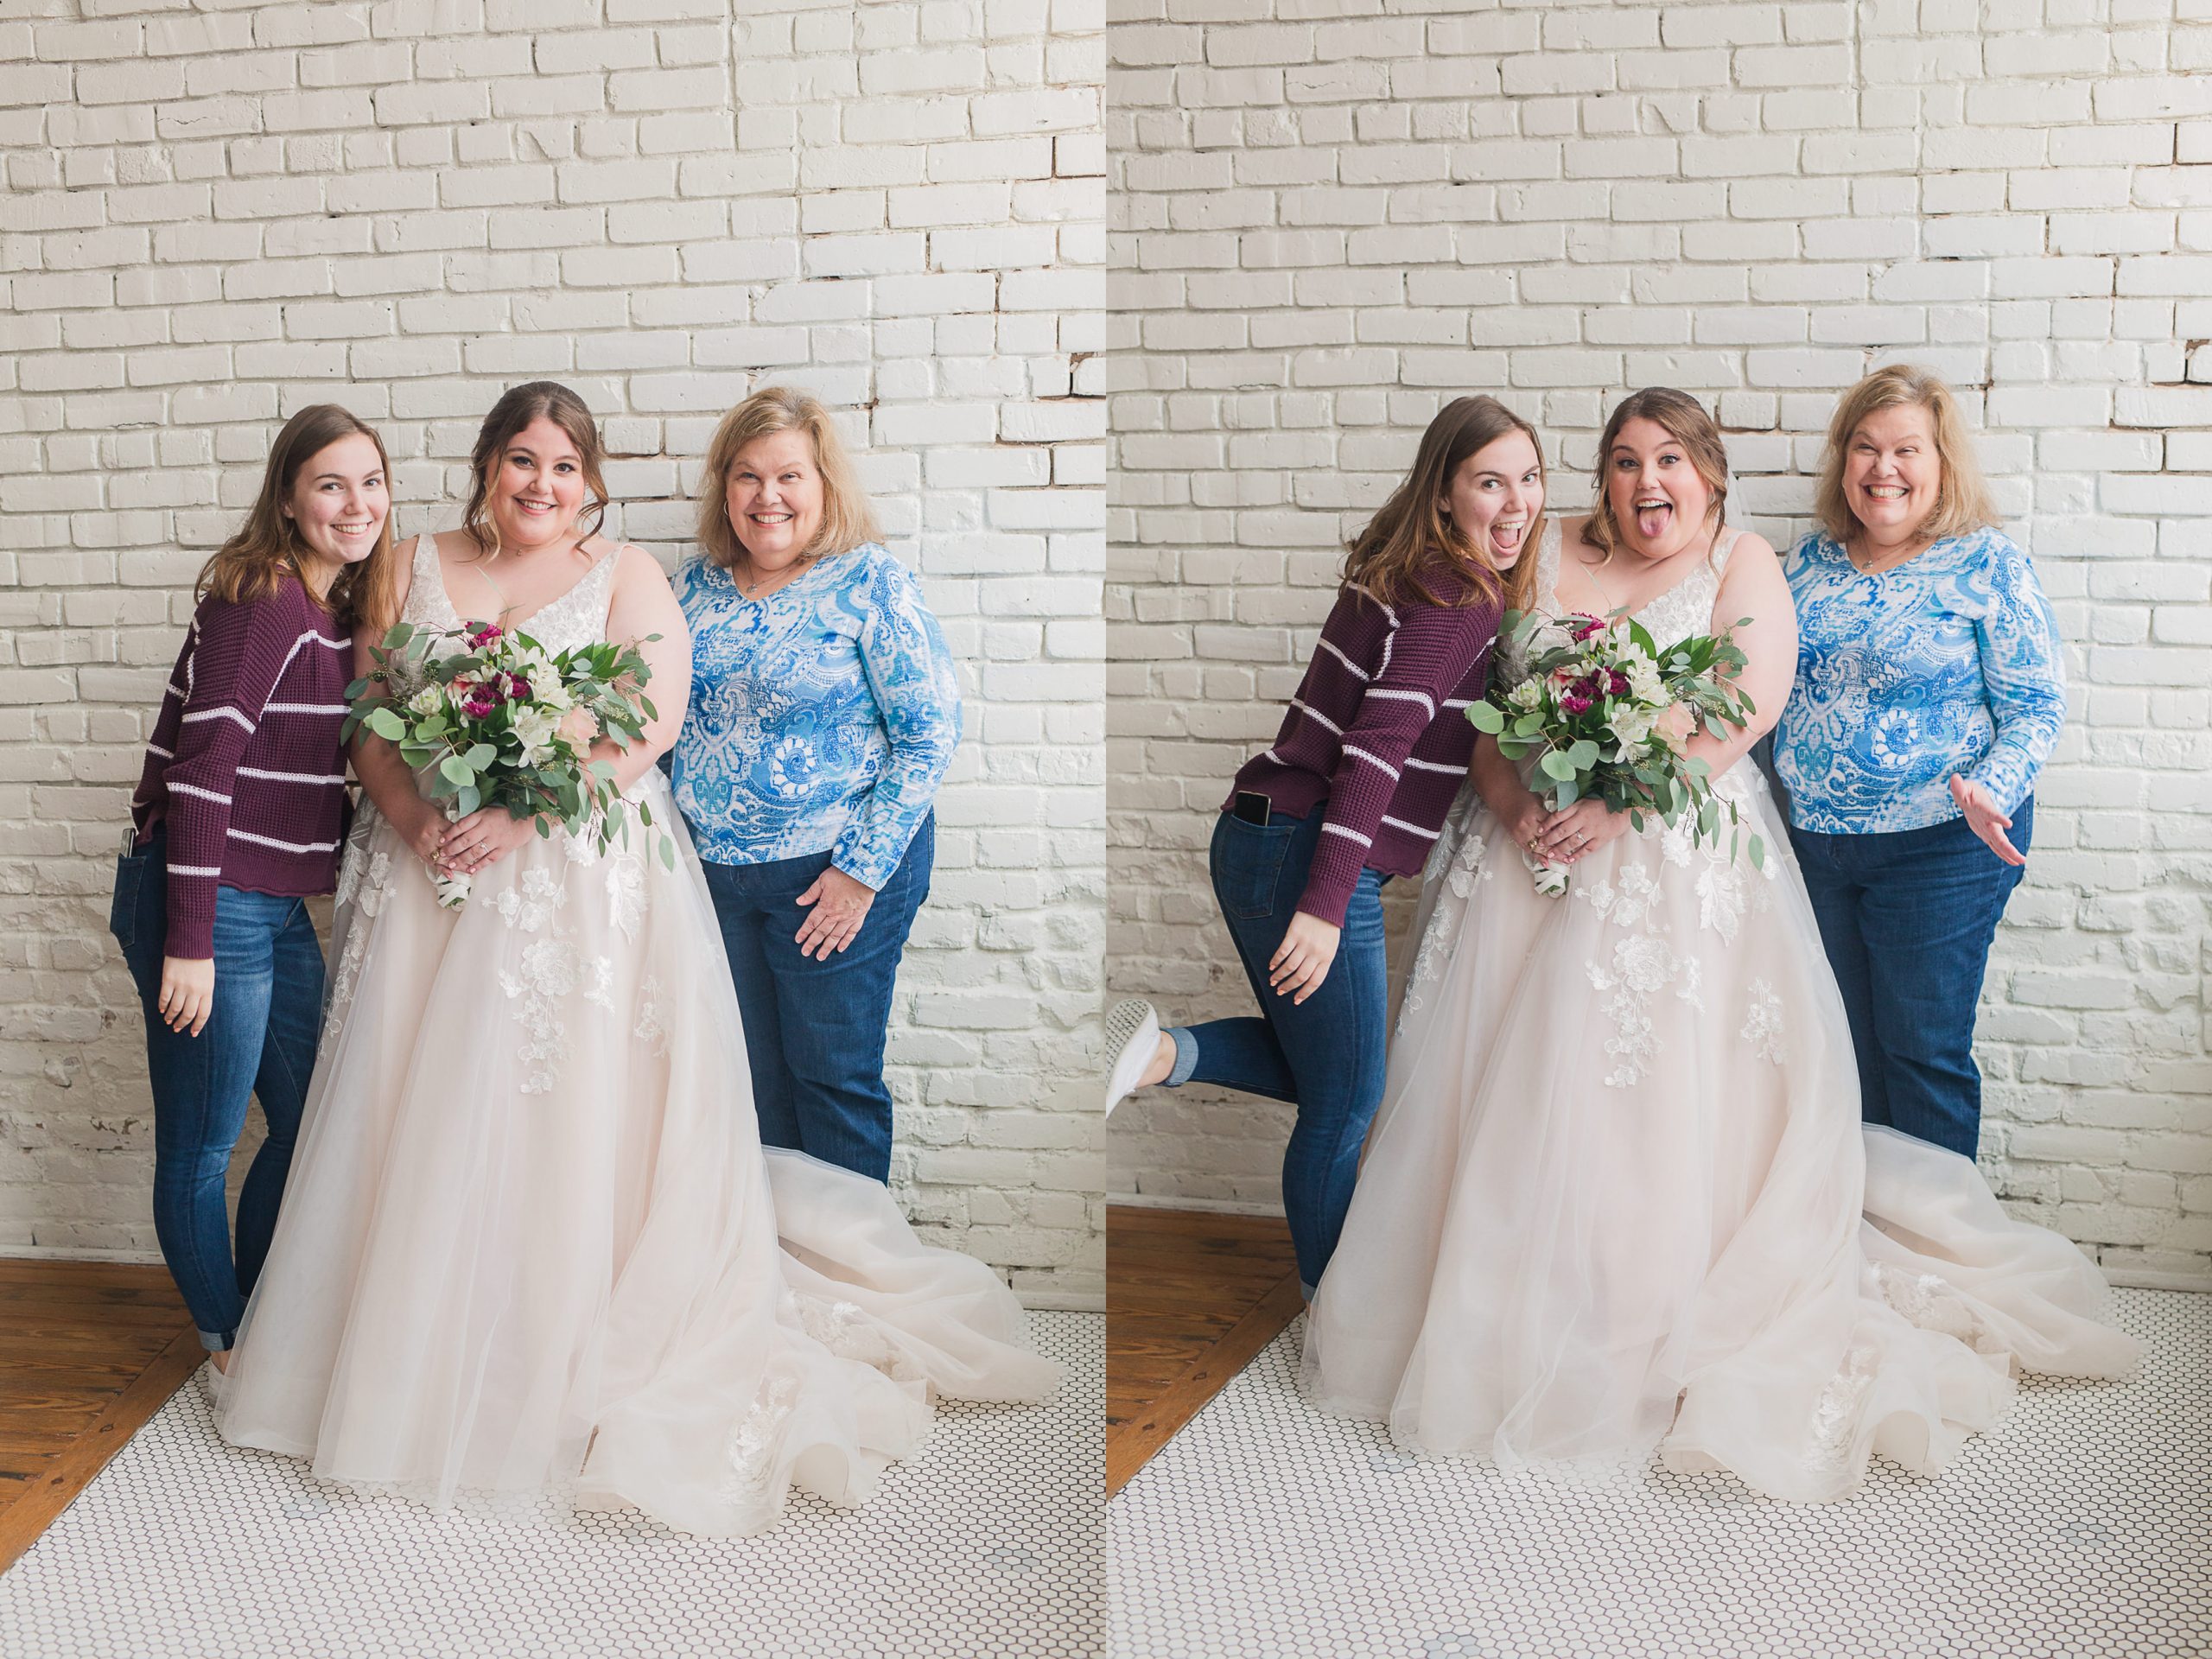 Bridal Portraits: Why They're Worth it